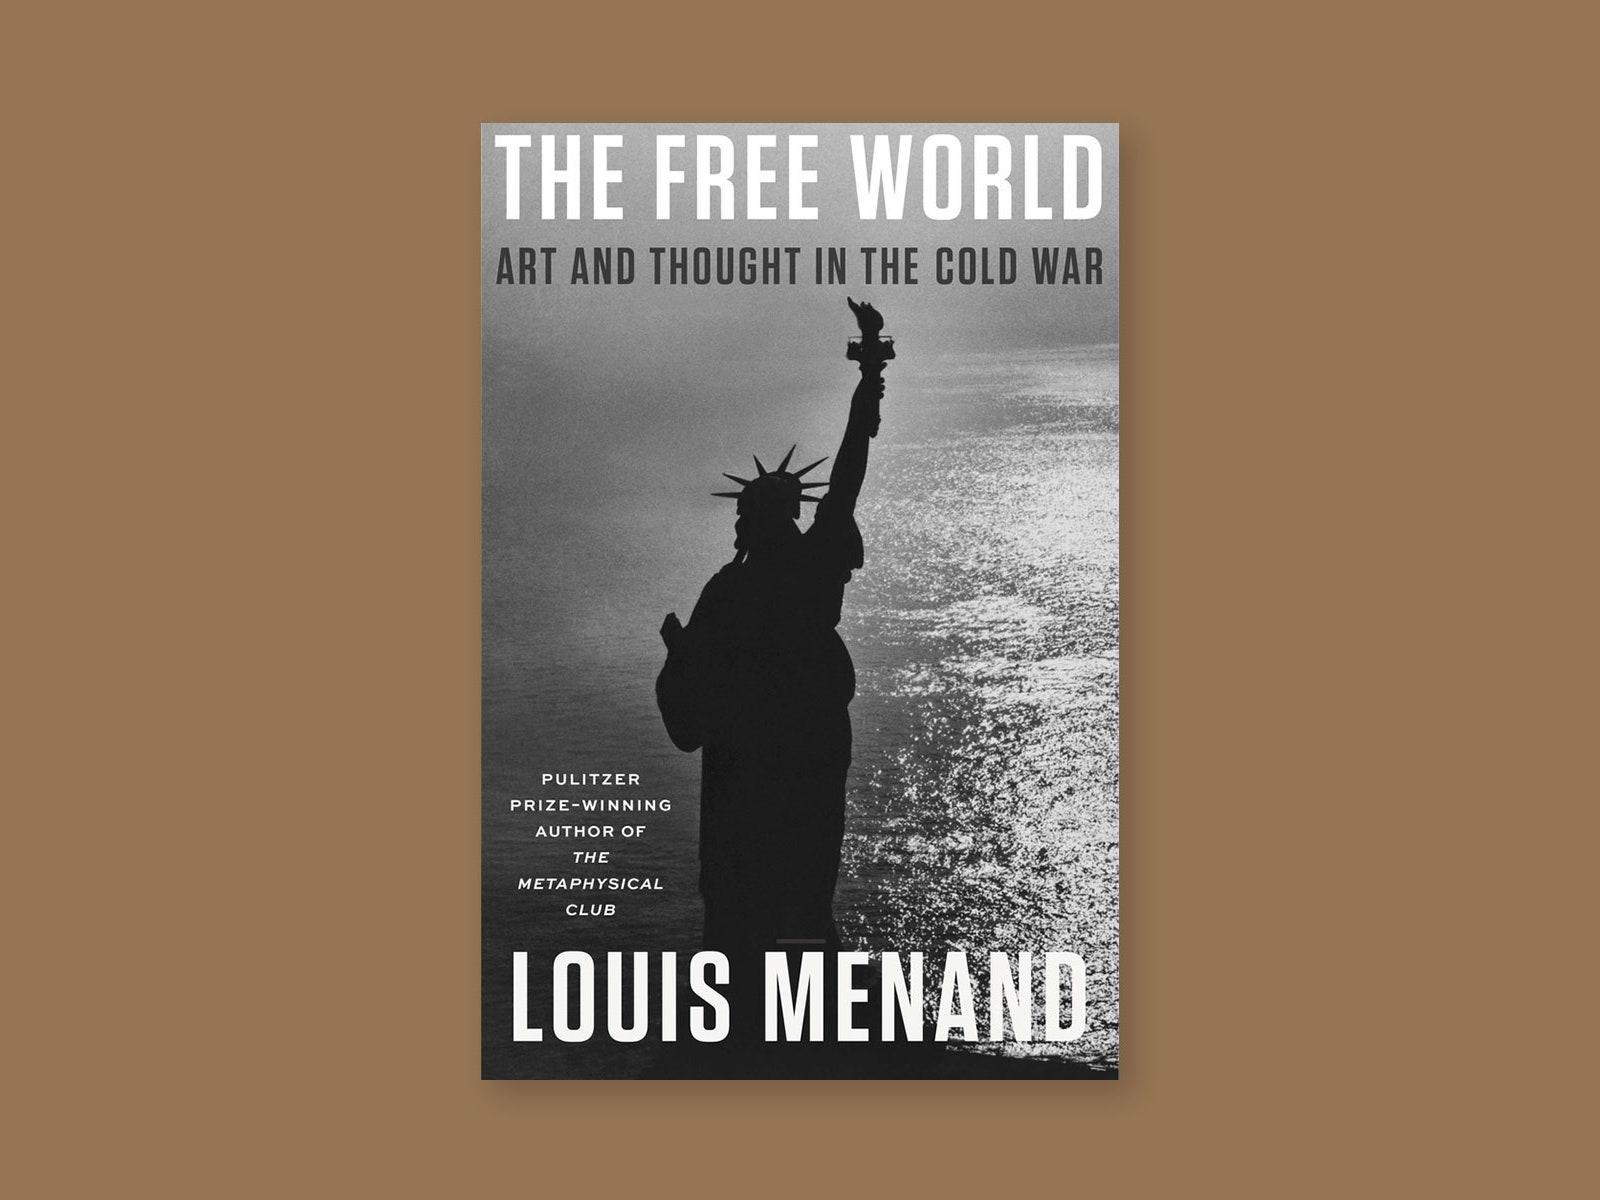 Louis Menand: Art and Thought in the Cold War 